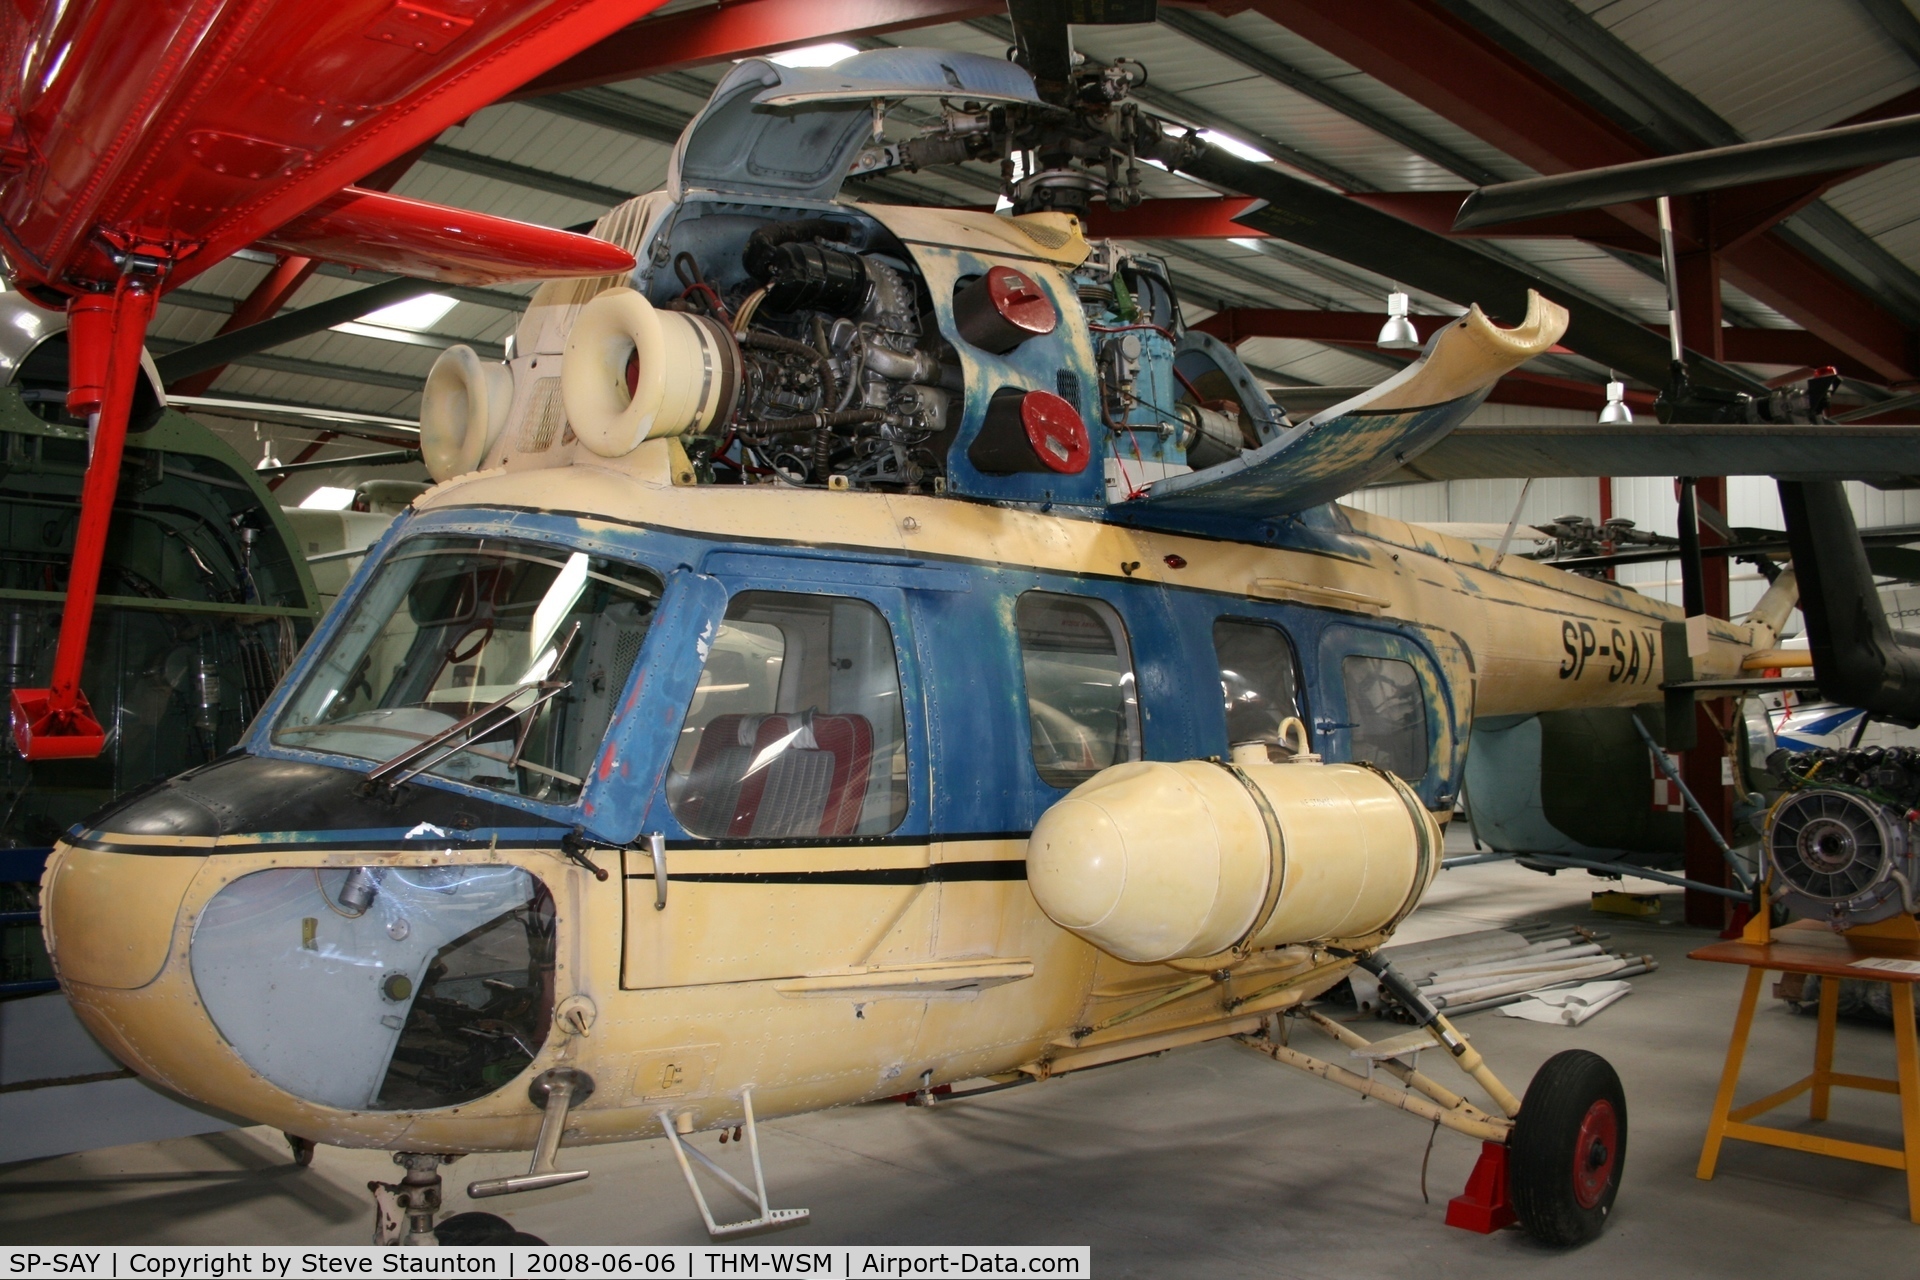 SP-SAY, 1985 PZL-Swidnik Mi-2 C/N 529538125, Taken at the Helicopter Museum (http://www.helicoptermuseum.co.uk/)